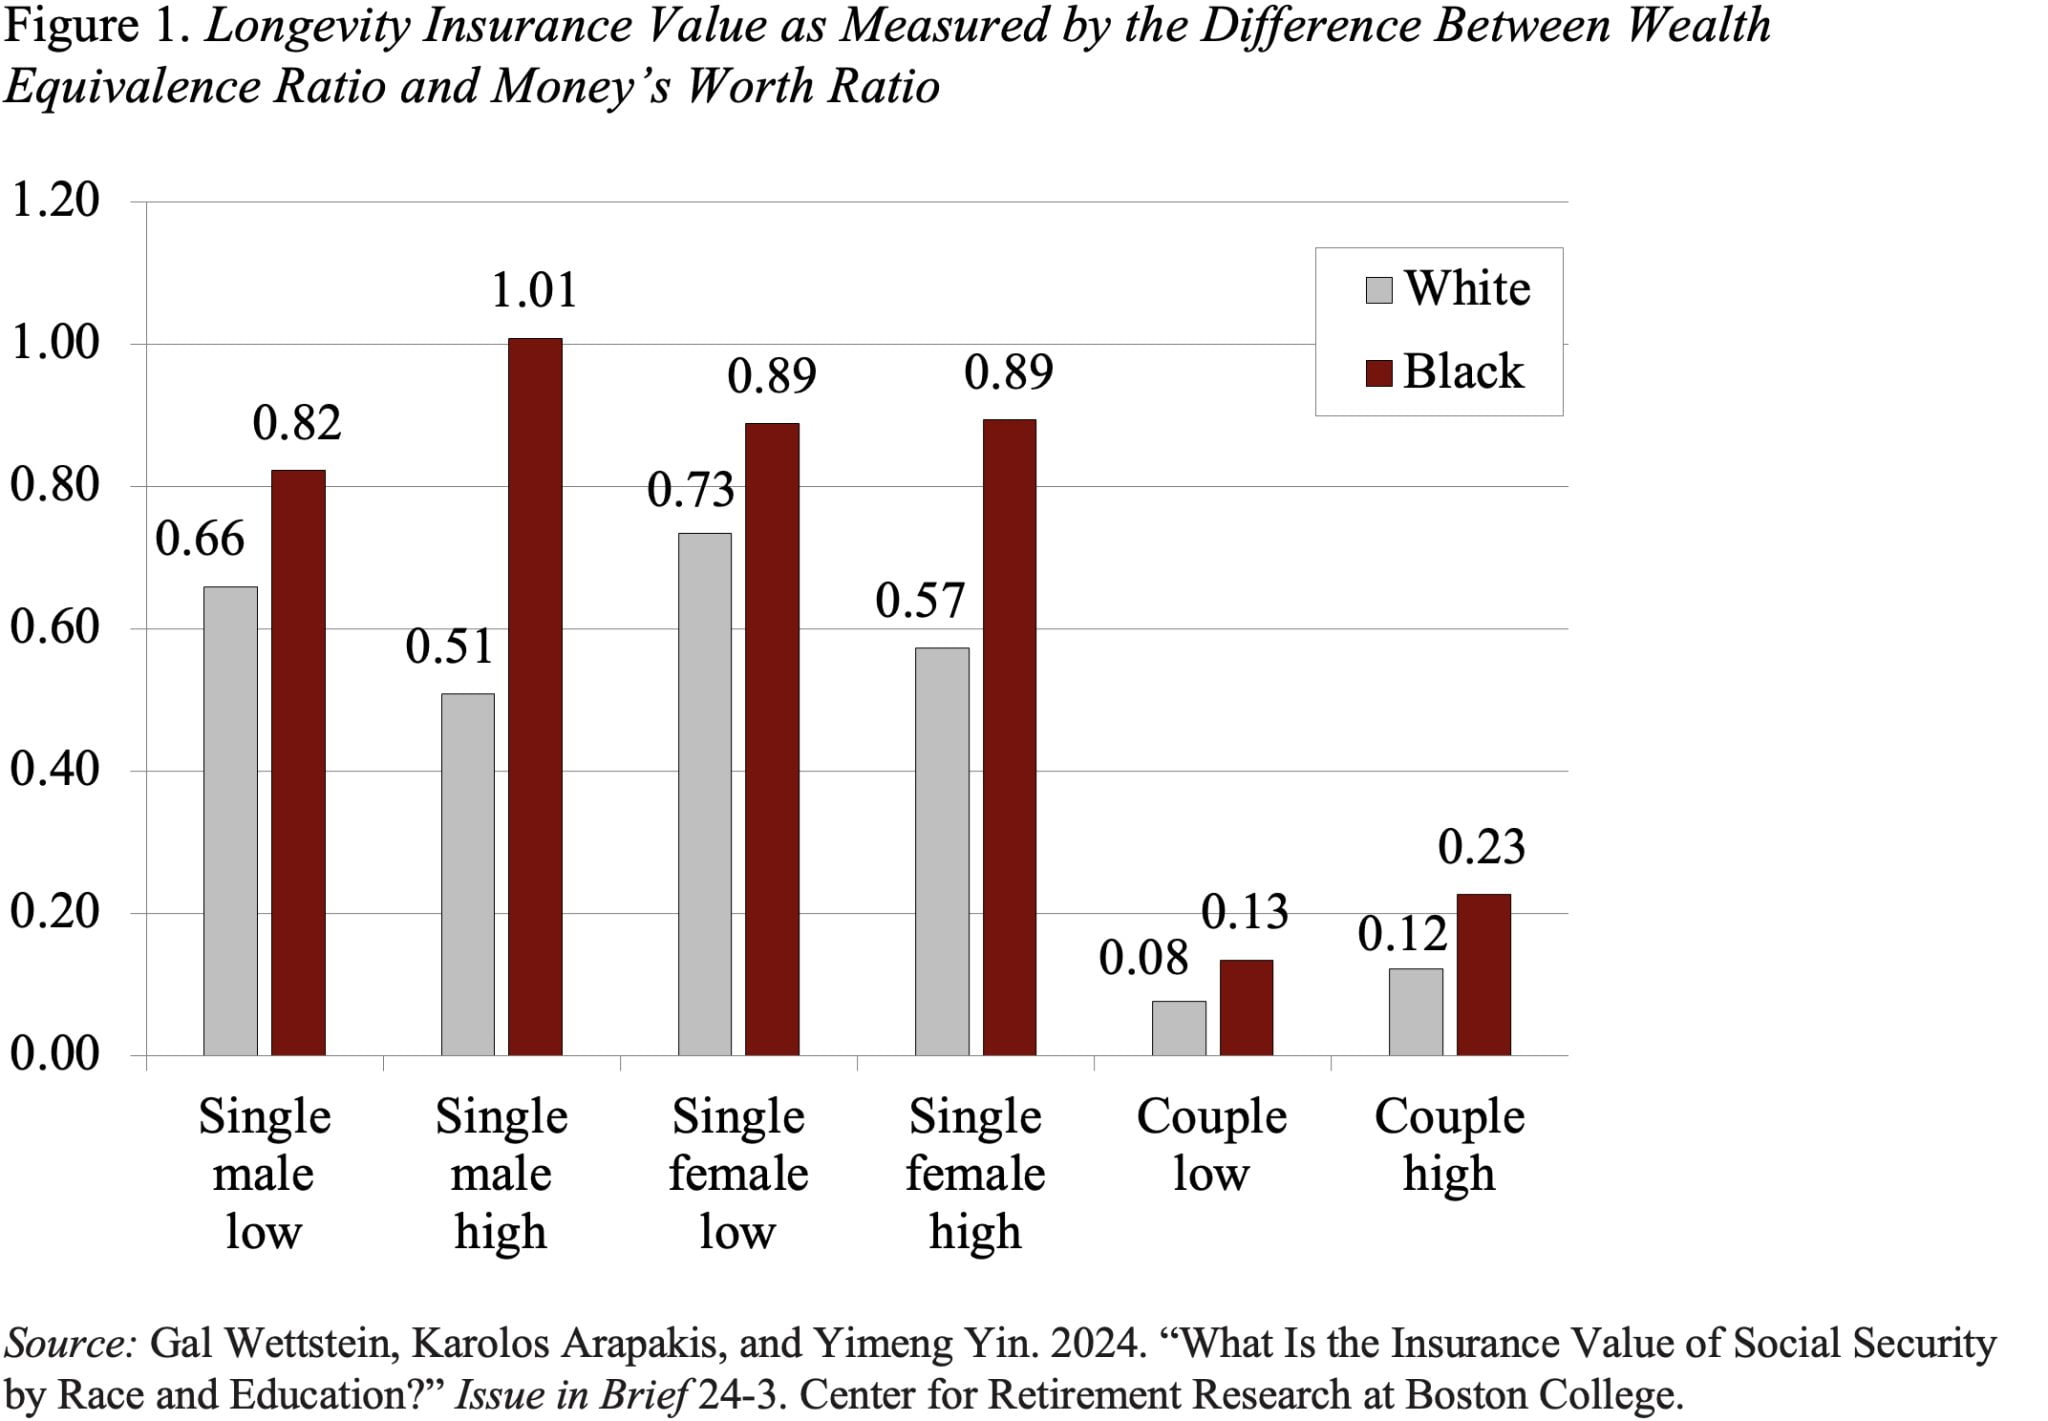 Bar graph showing longevity insurance value as measured by the difference between wealth equivalence ratio and money's worth ratio